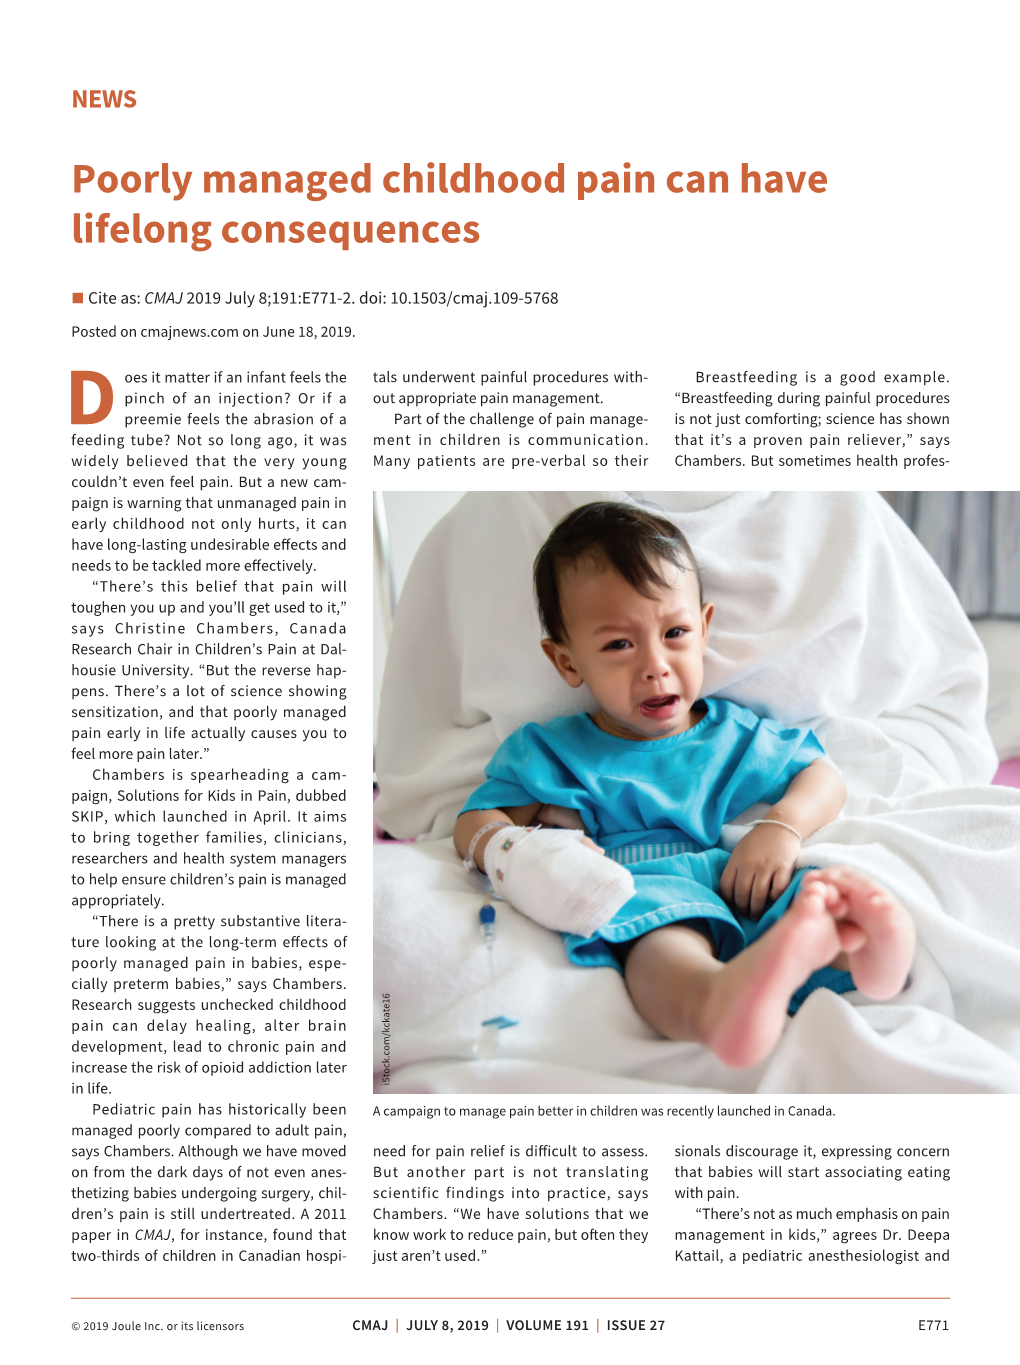 Poorly Managed Childhood Pain Can Have Lifelong Consequences